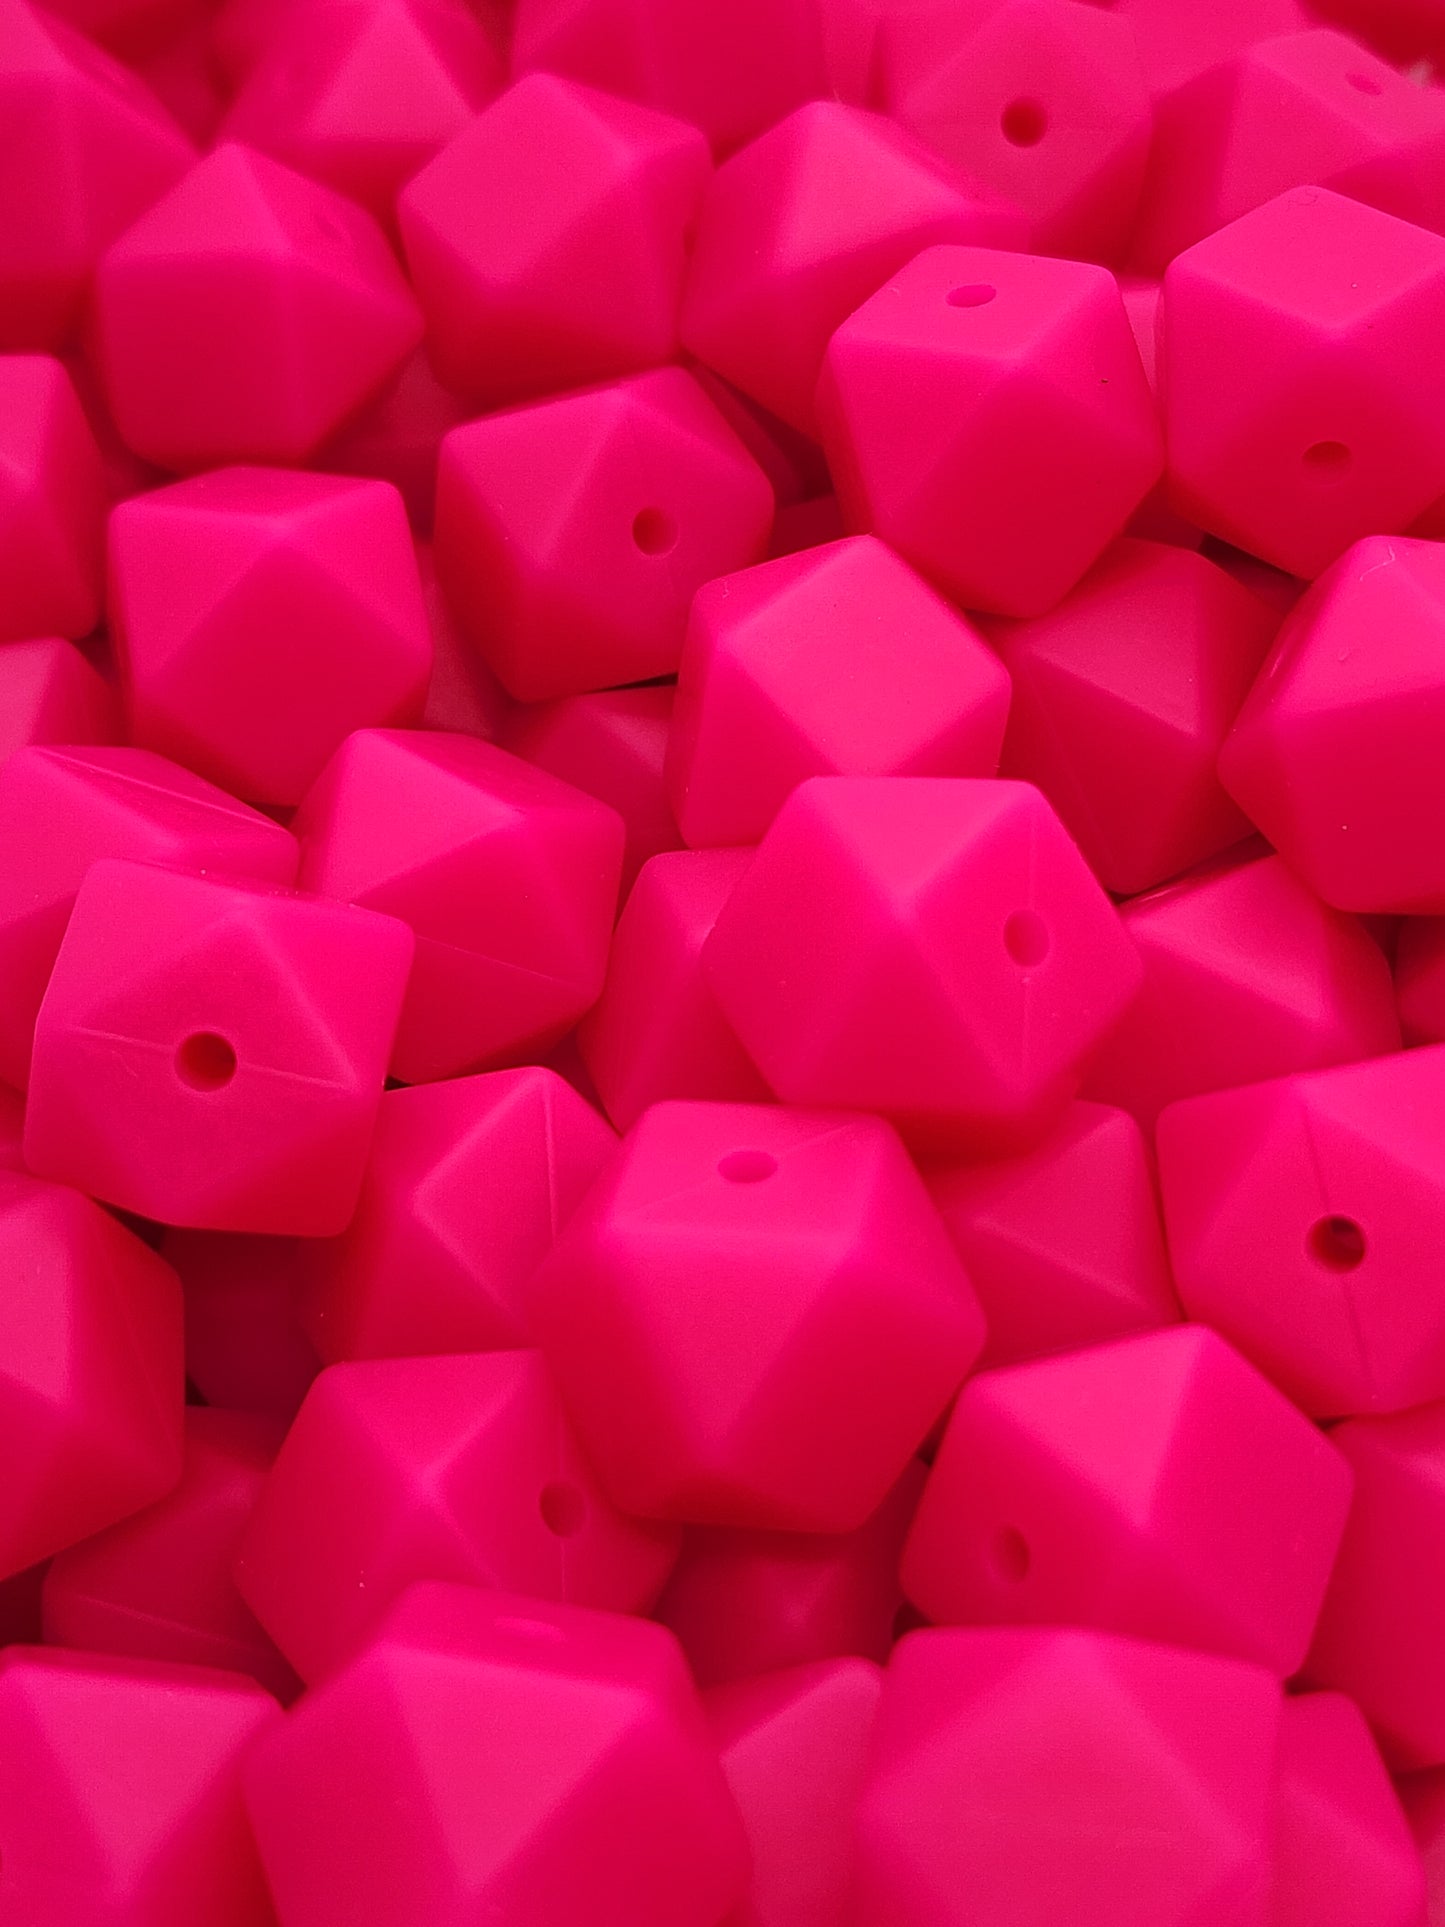 24. Hot Pink Hexagon Silicone Beads